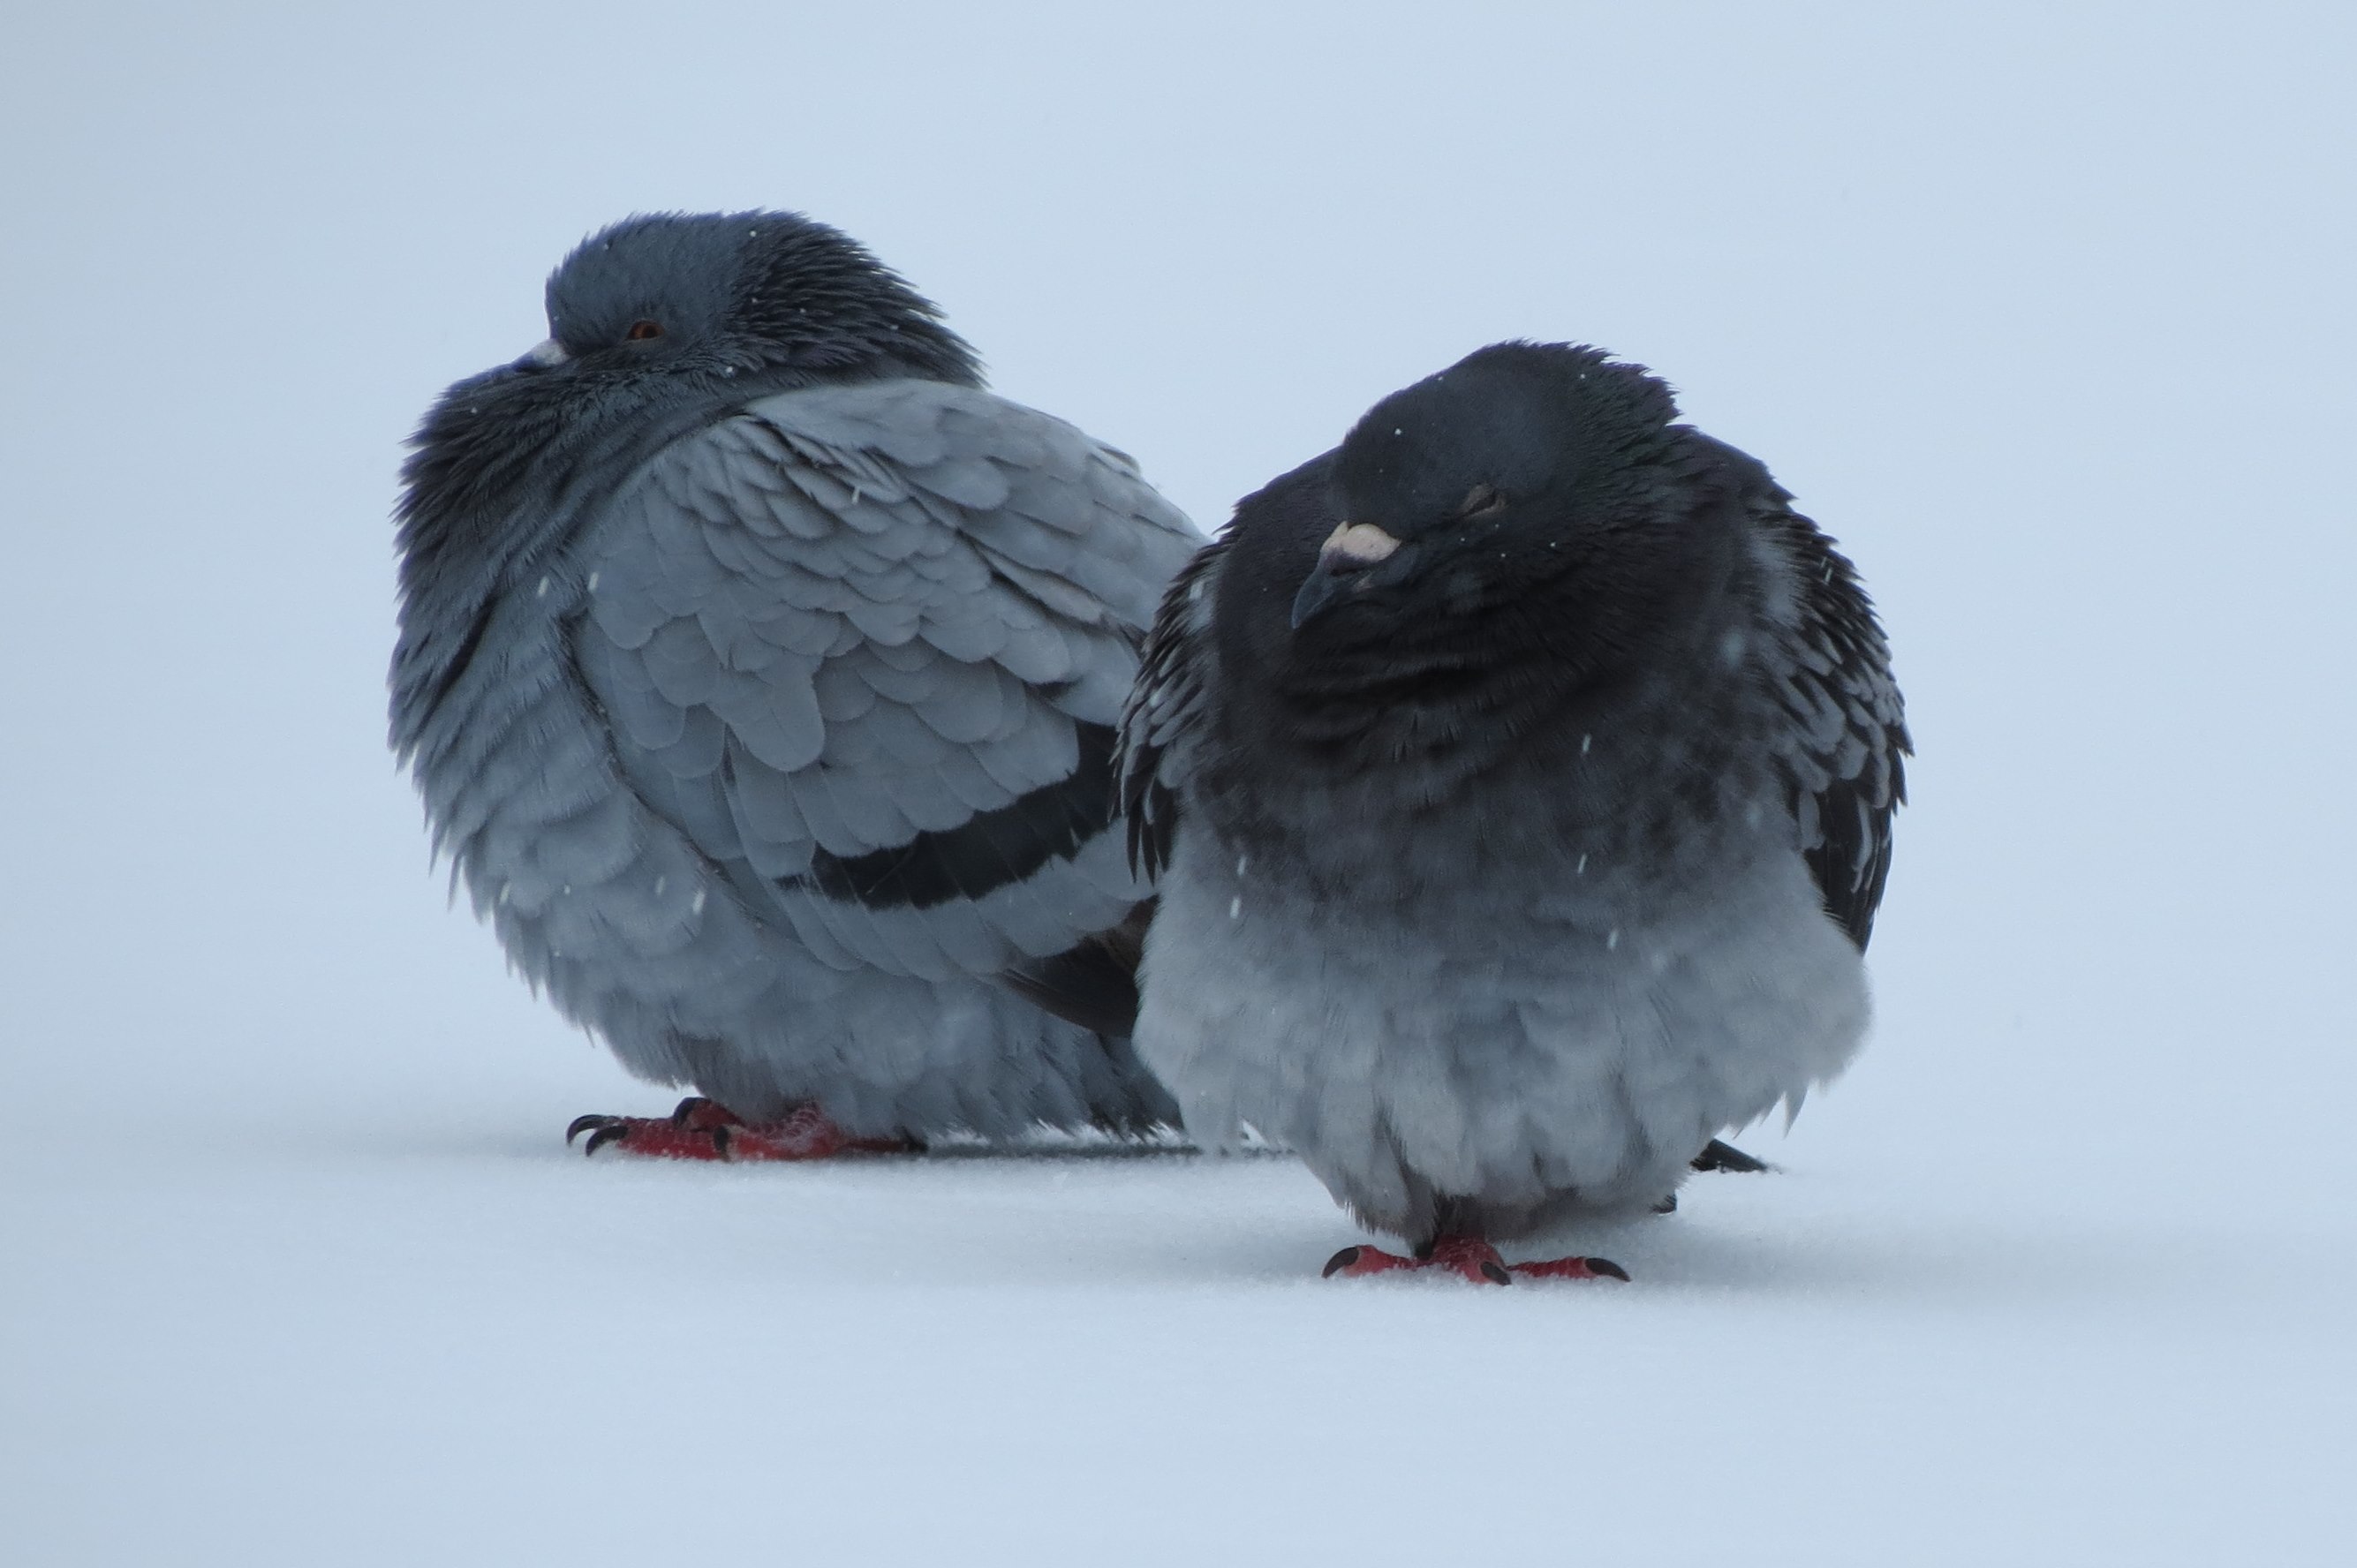 Pigeons Freezing in a Field